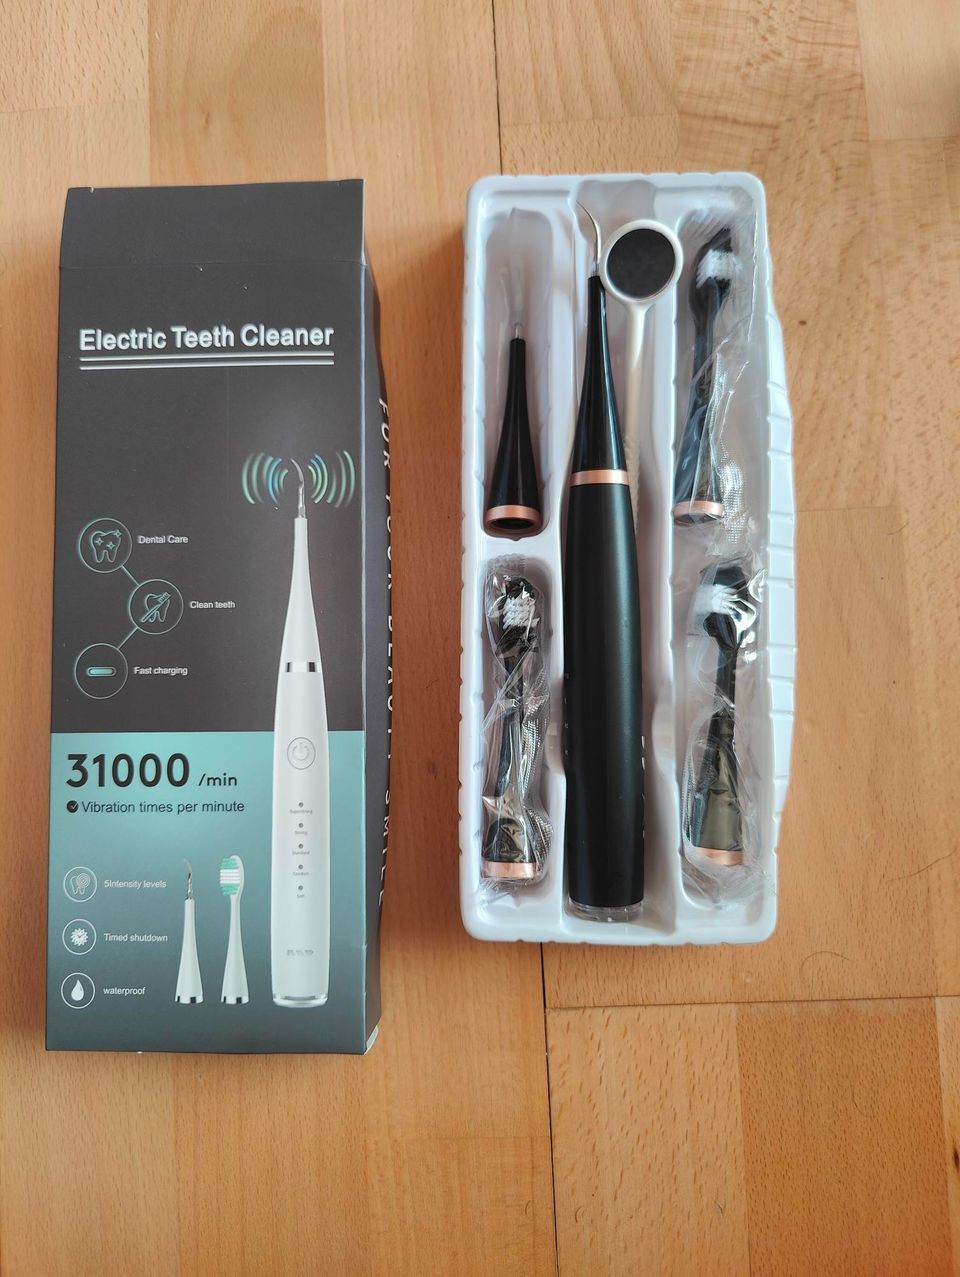 Ultrasonic Electric toothbrush and teeth cleaner